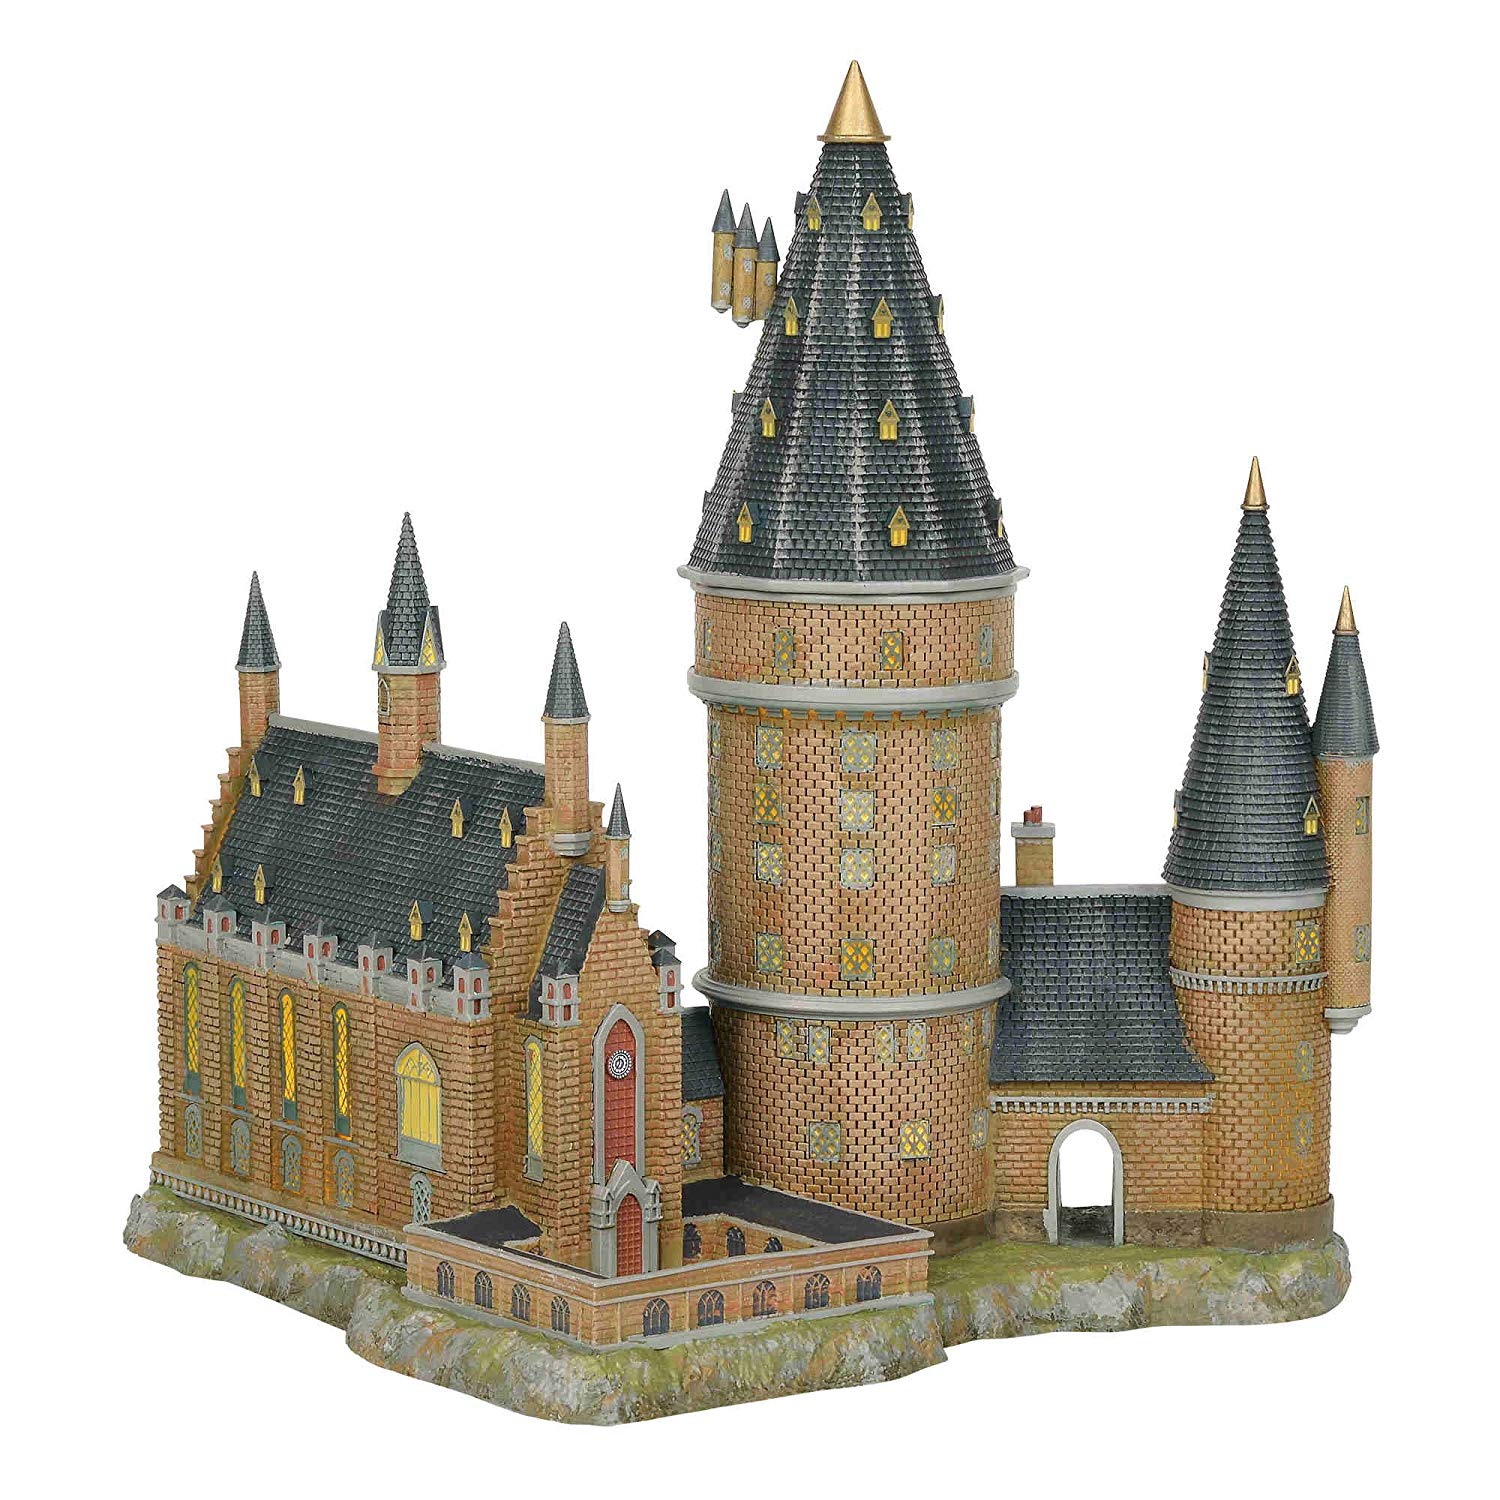 Department 56 Harry Potter Village Hogwarts Great Hall and Tower Lighted Building